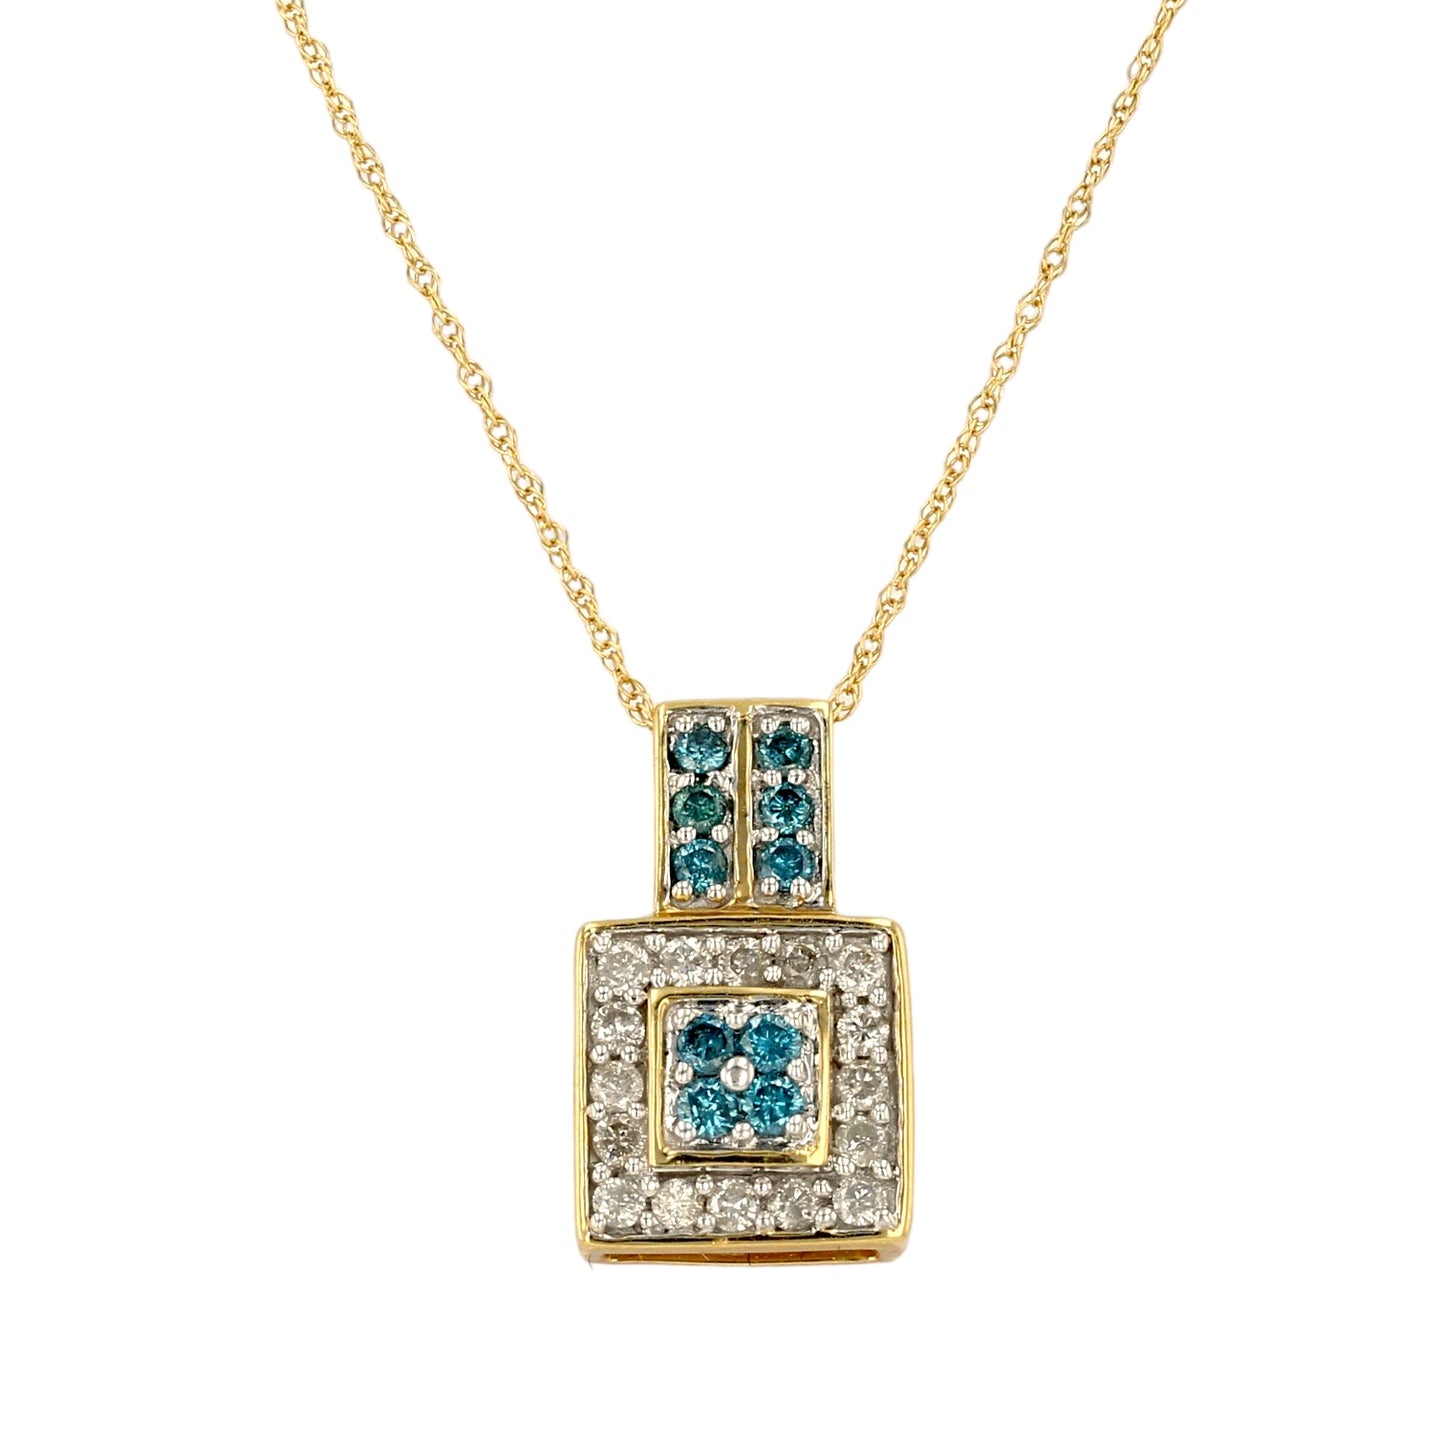 14K Yellow gold impera blue and white diamond necklace